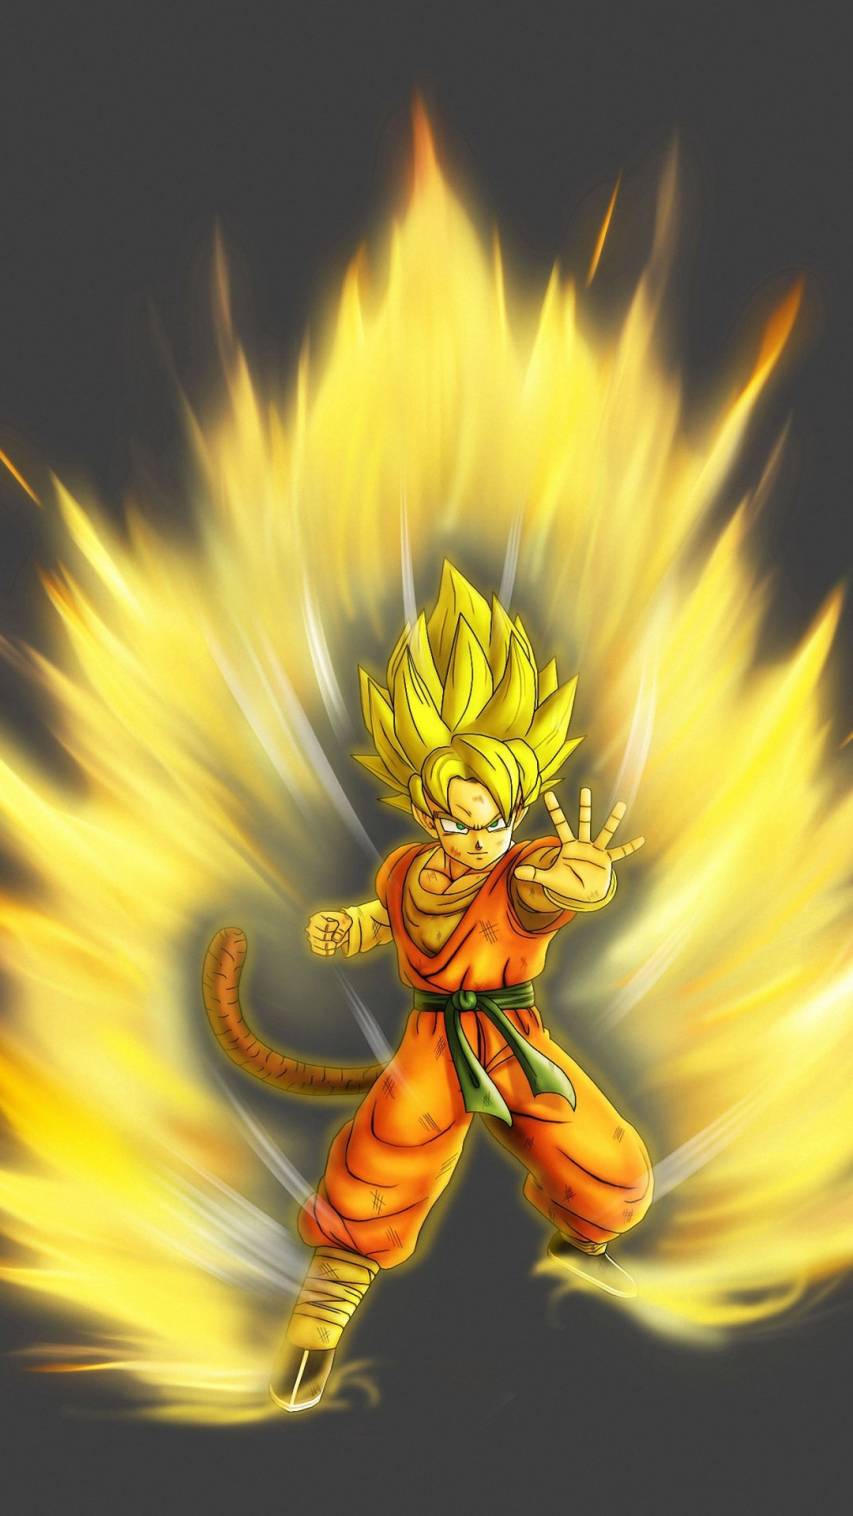 Dragon Ball Z IPhone Wallpapers and Backgrounds image Free Download